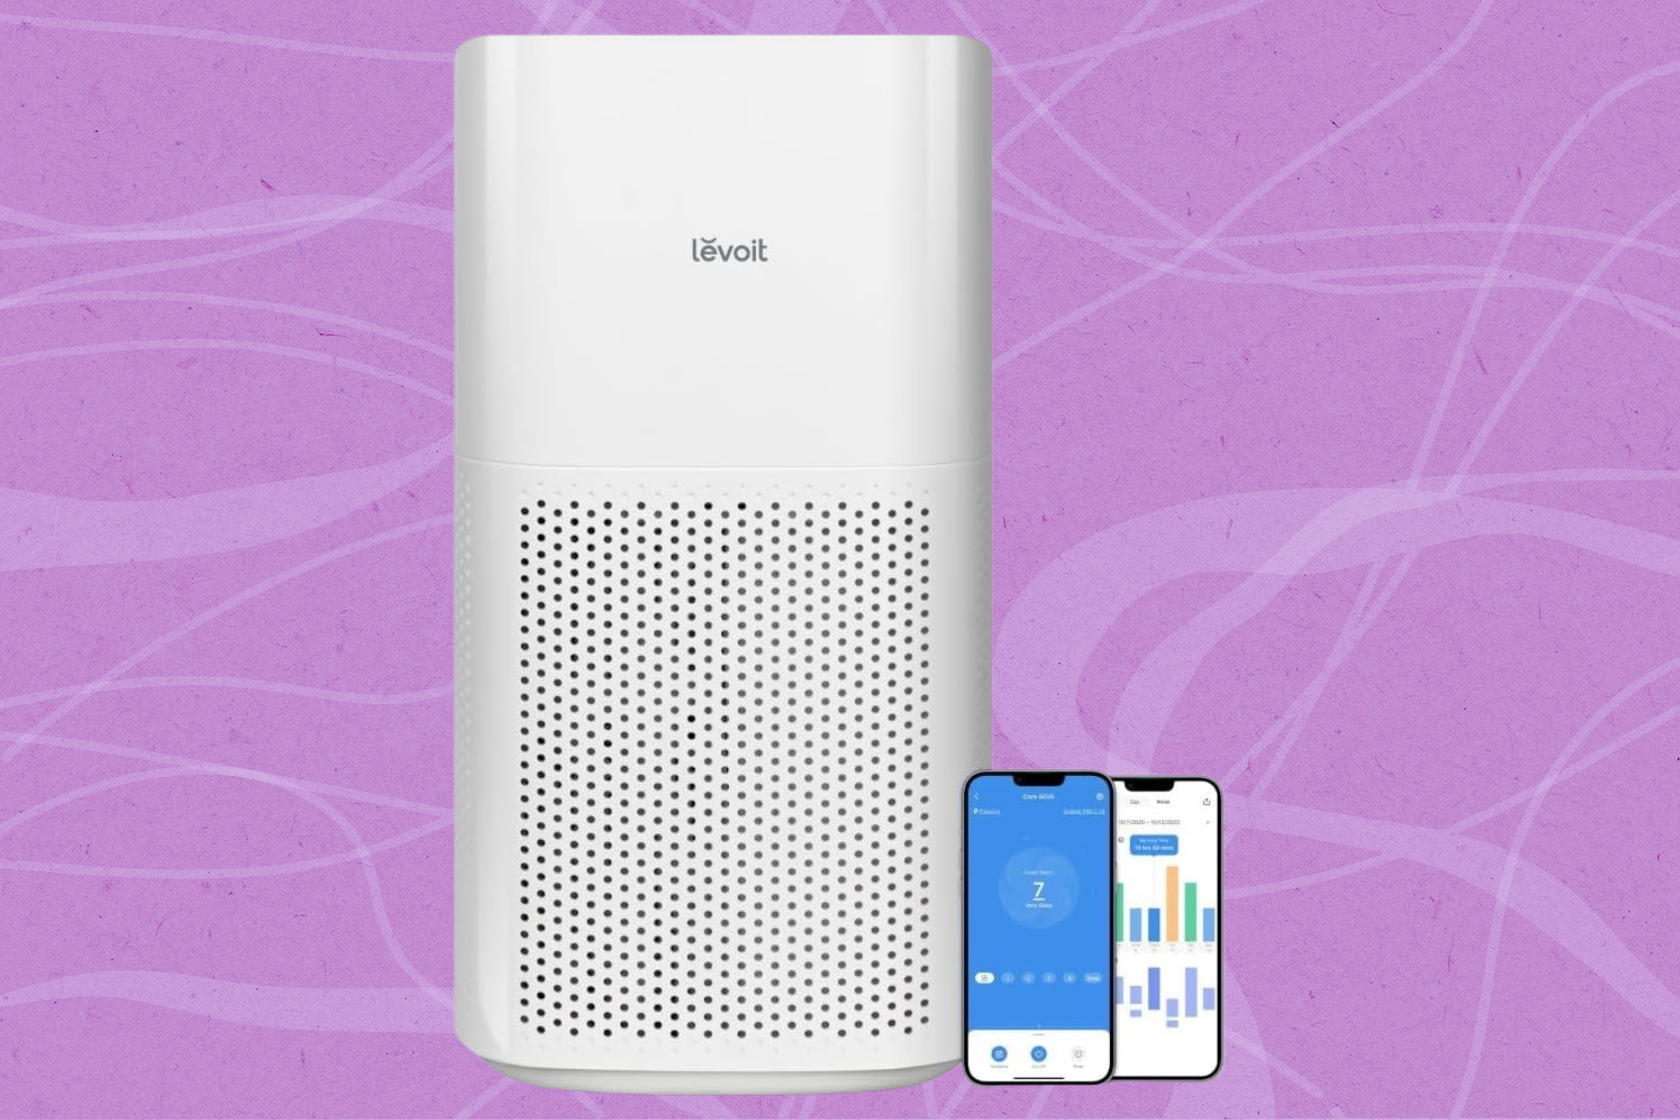 Breathe easy and save $50 on a smart 3-in-1 air purifier at Amazon today